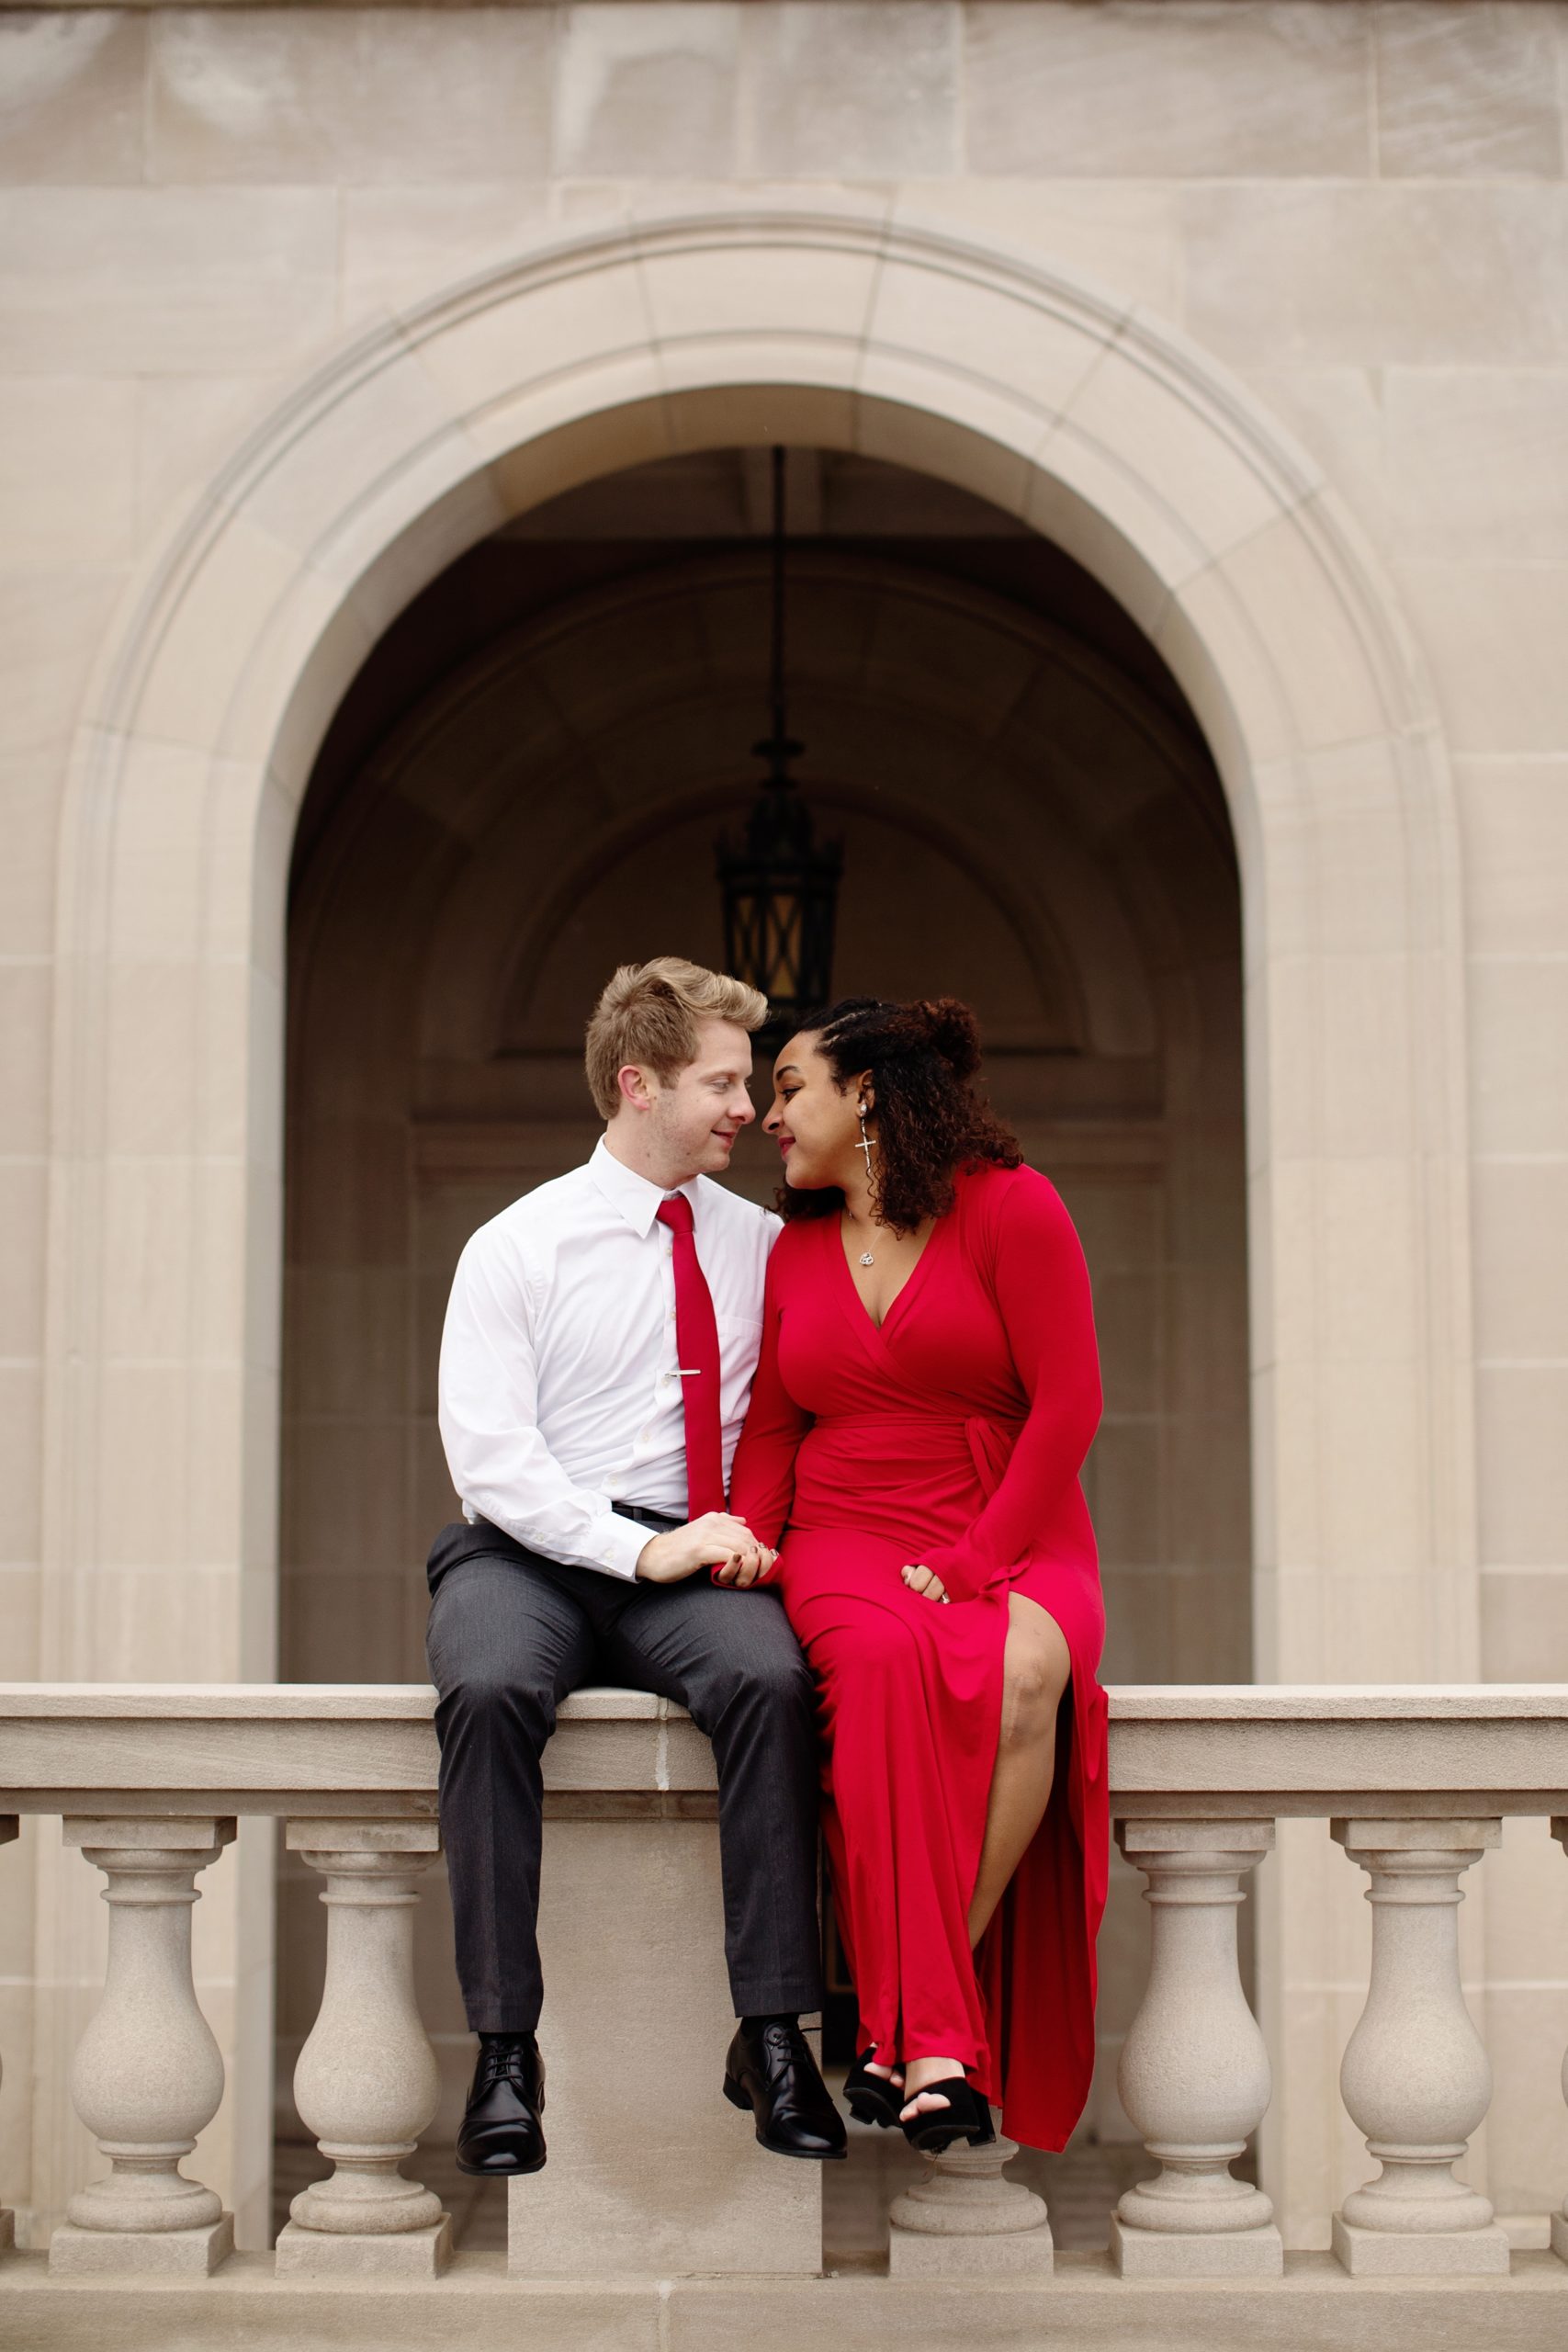 Hershey PA Theatre Romantic and Bold Engagement Photo Session captured by Hershey, PA photographers Janae Rose Photography